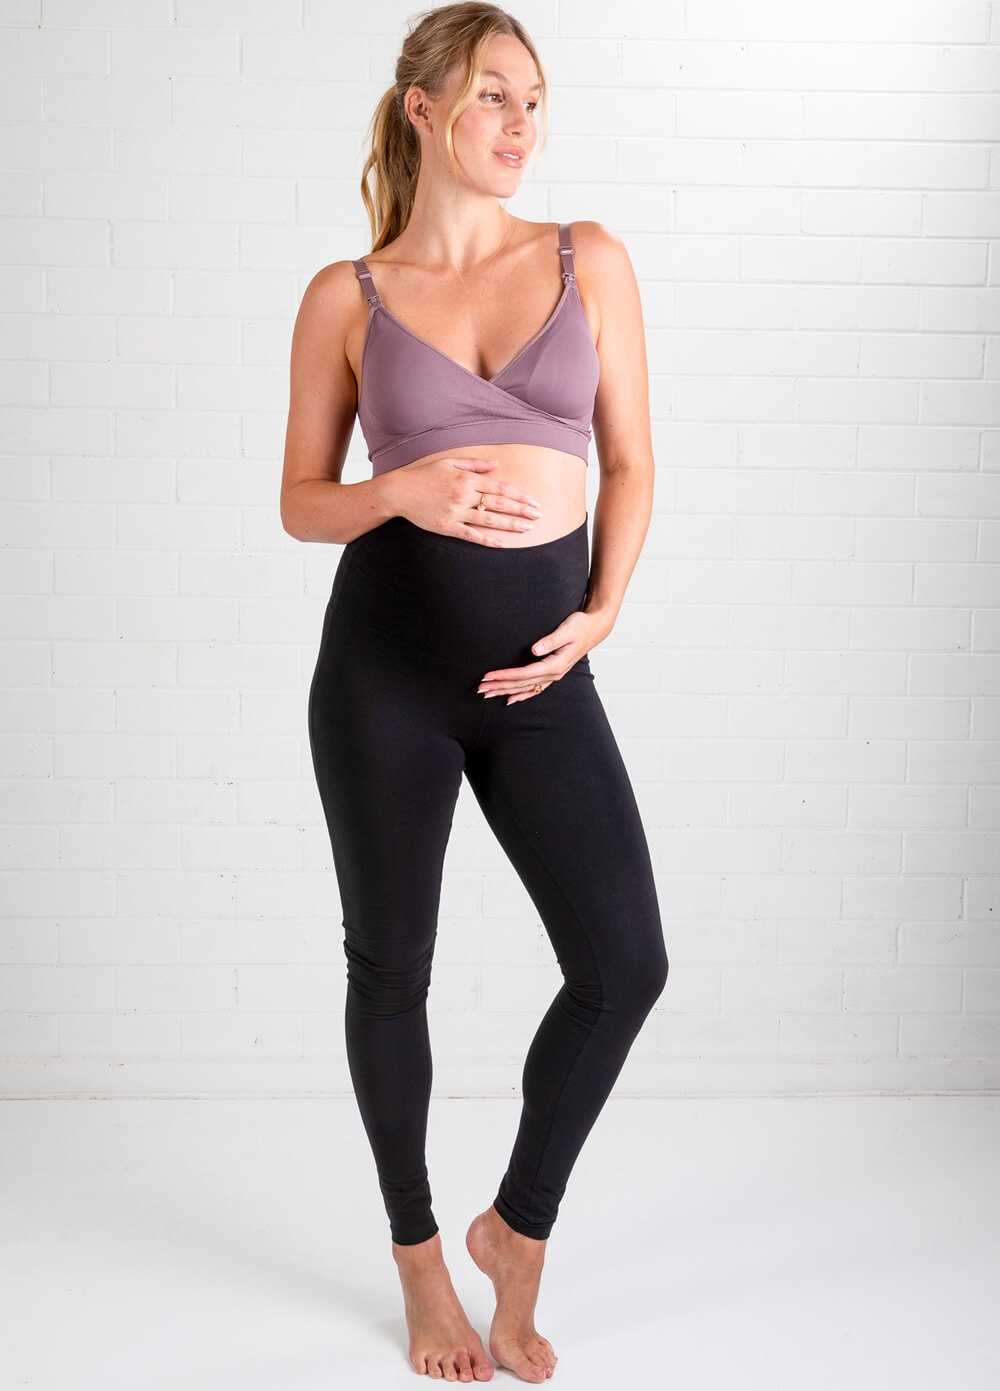 TOP 5 Best Maternity Workout Clothes - Ingenious! - YouTube